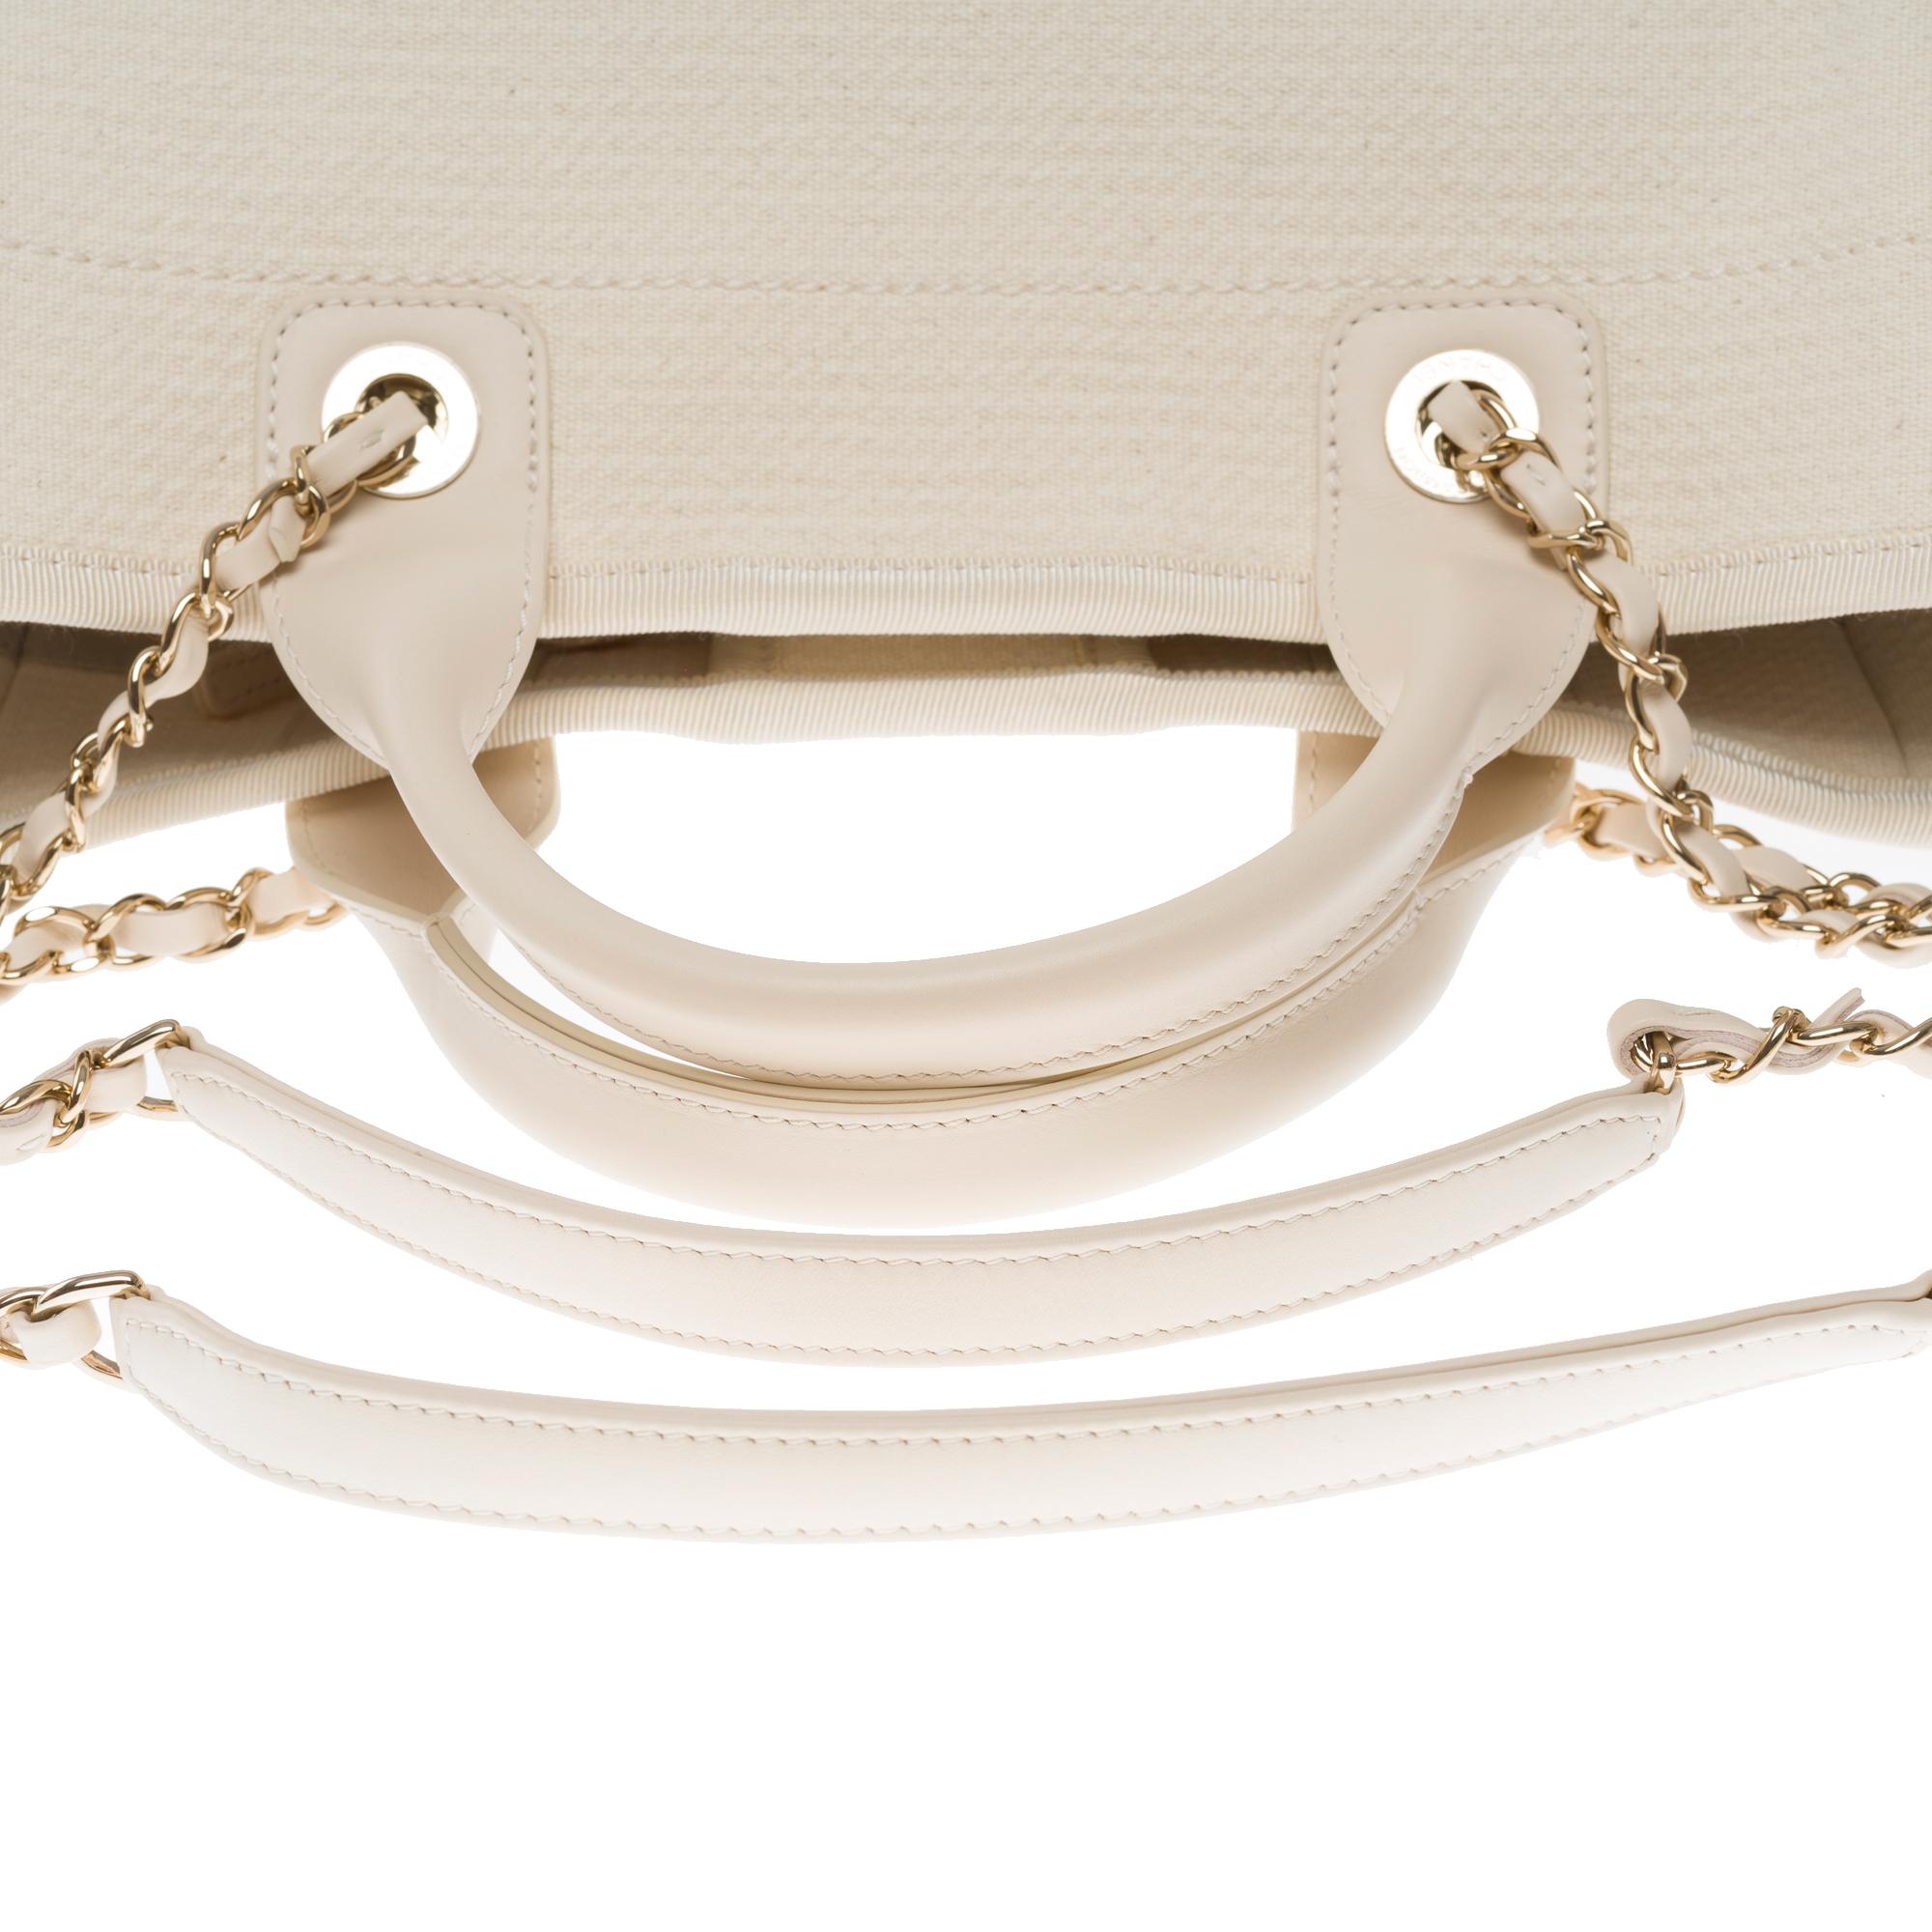 Amazing Chanel Deauville tote bag in off white canvas, SHW For Sale 8